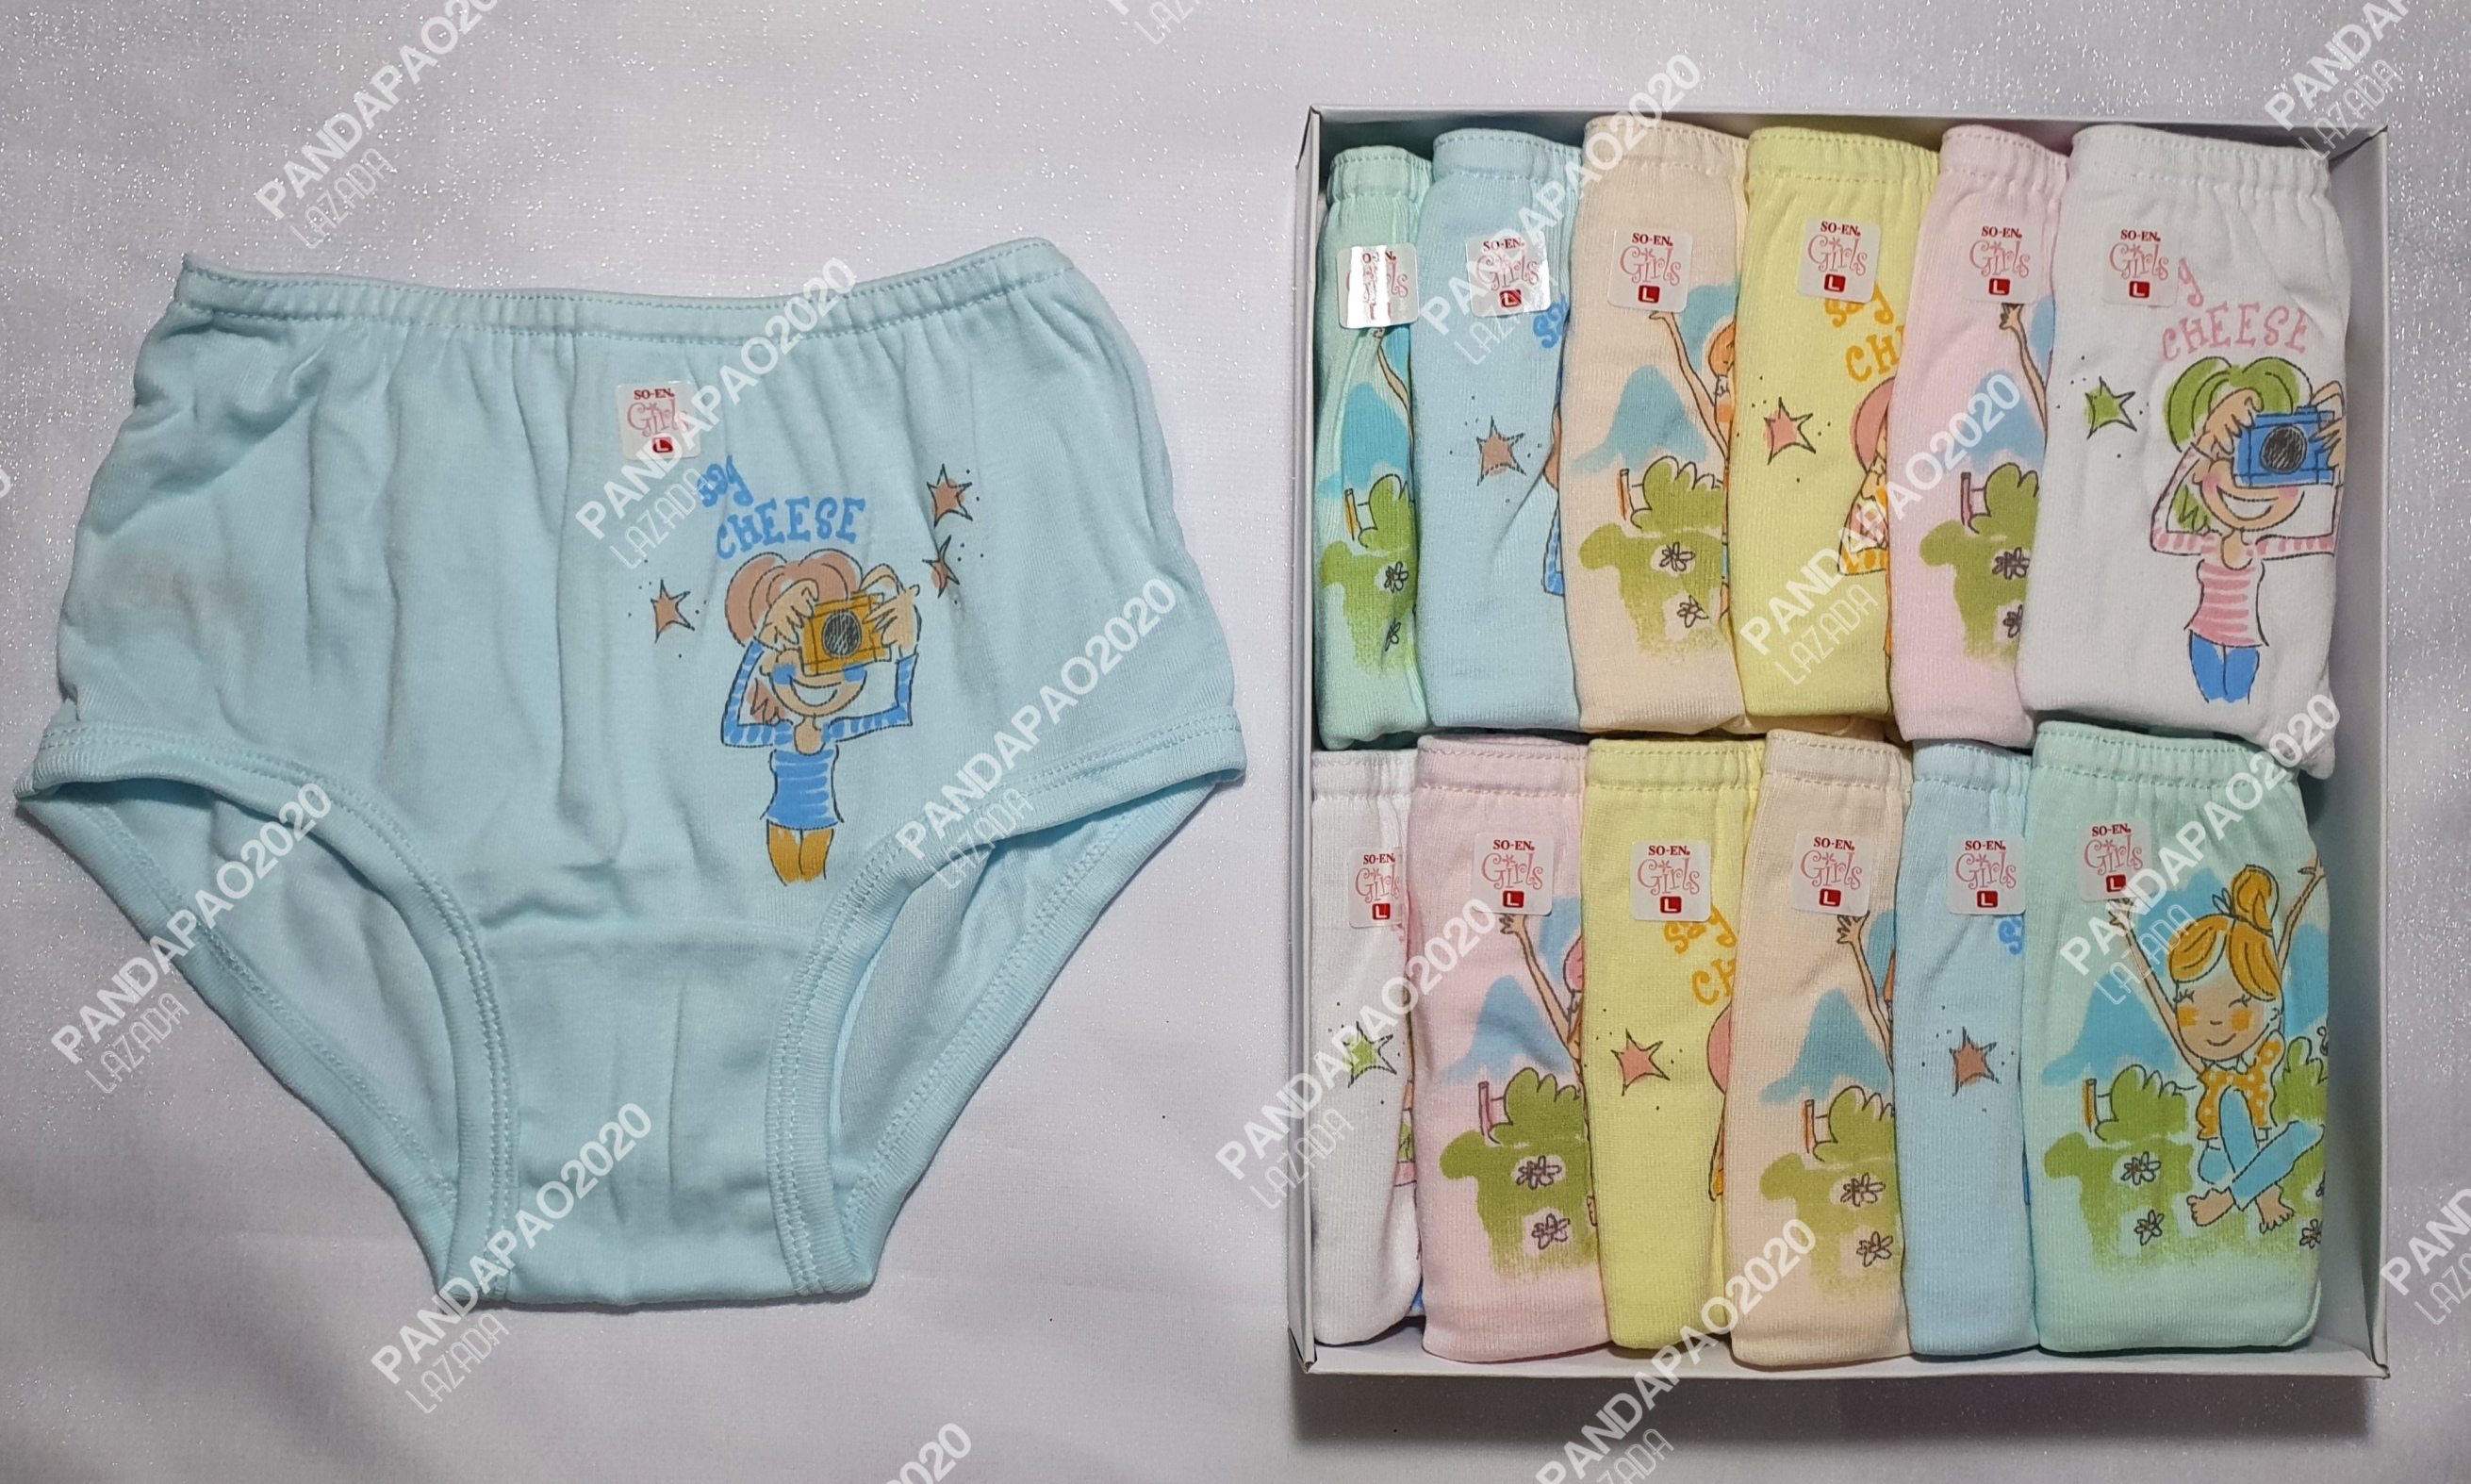 Original SOEN SEMI-FULL PANTY SMP for Women/Teens ASSORTED COLOR and DESIGN  only